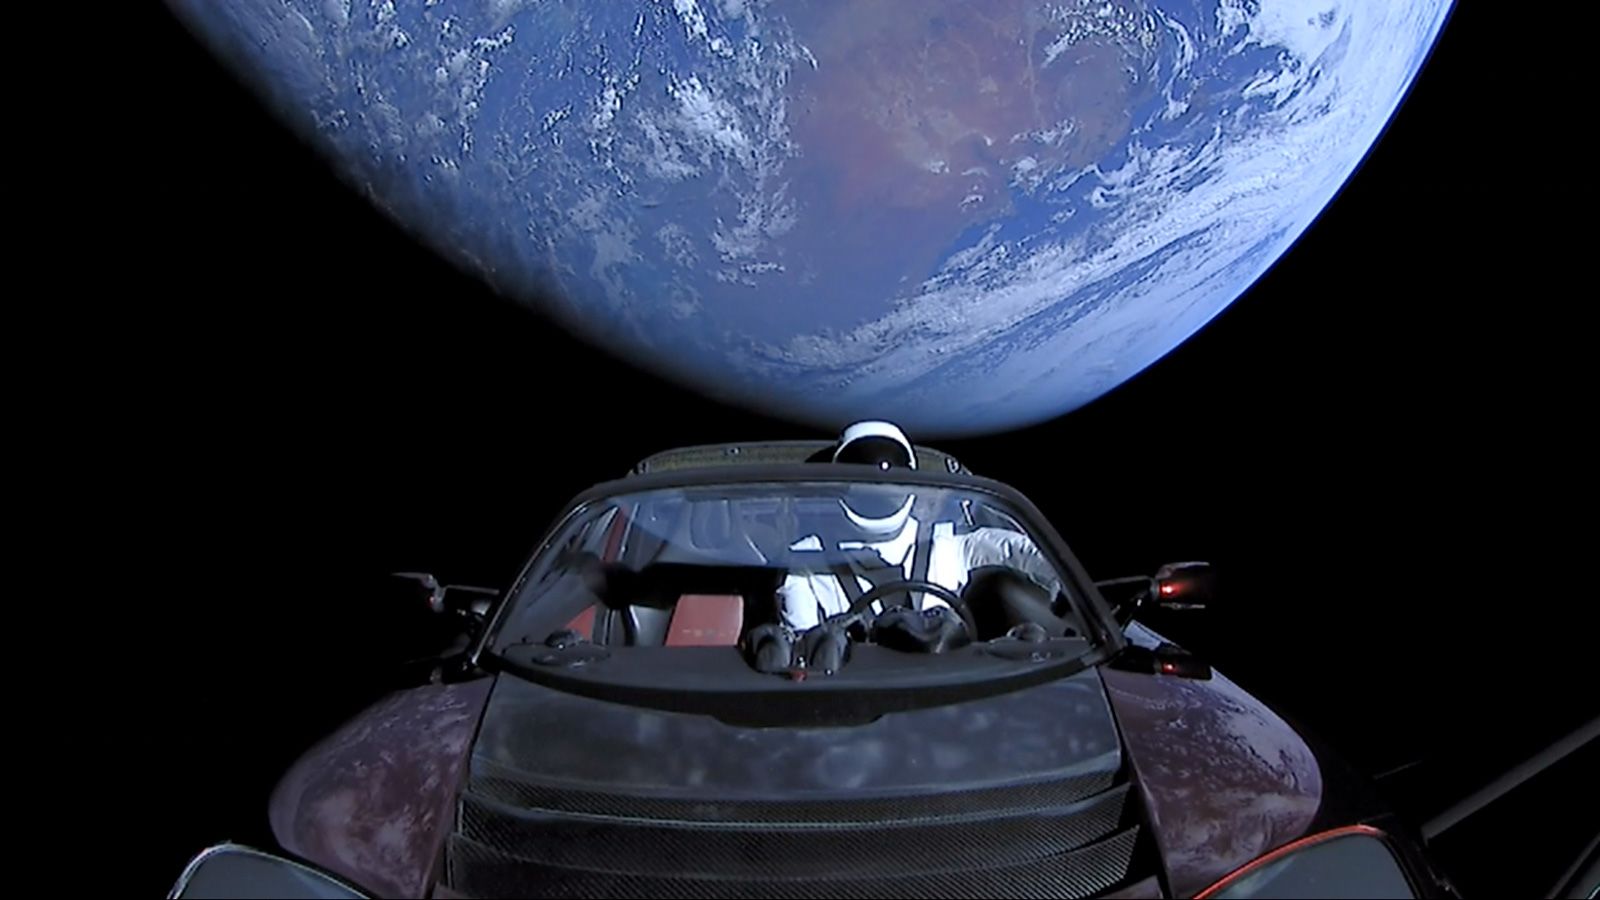 SpaceX put Elon Musk’s Tesla into space five years ago. Where is it now?